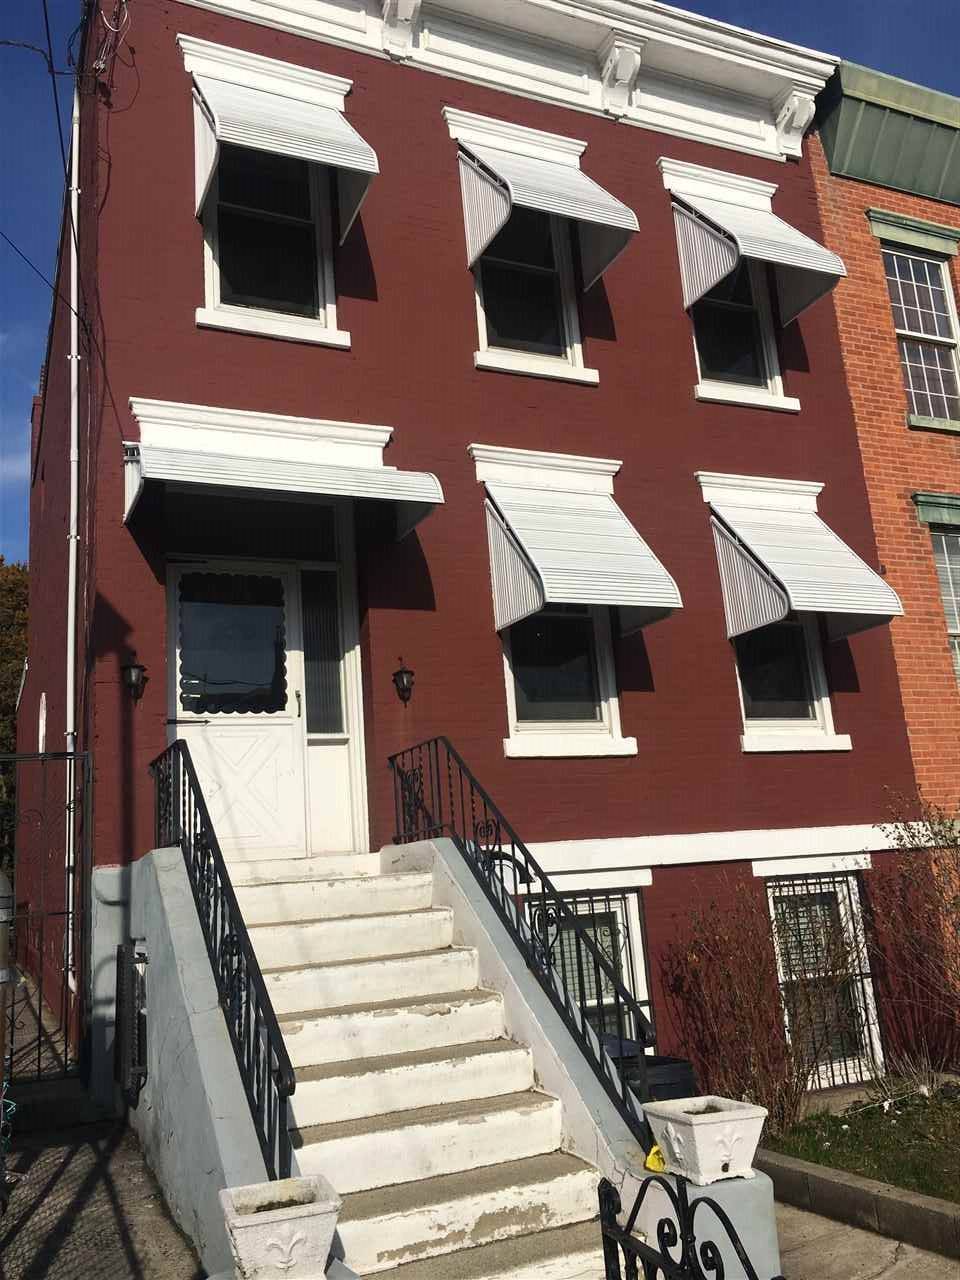 One of a kind single family brownstone in a well desirable area of Jersey City Heights